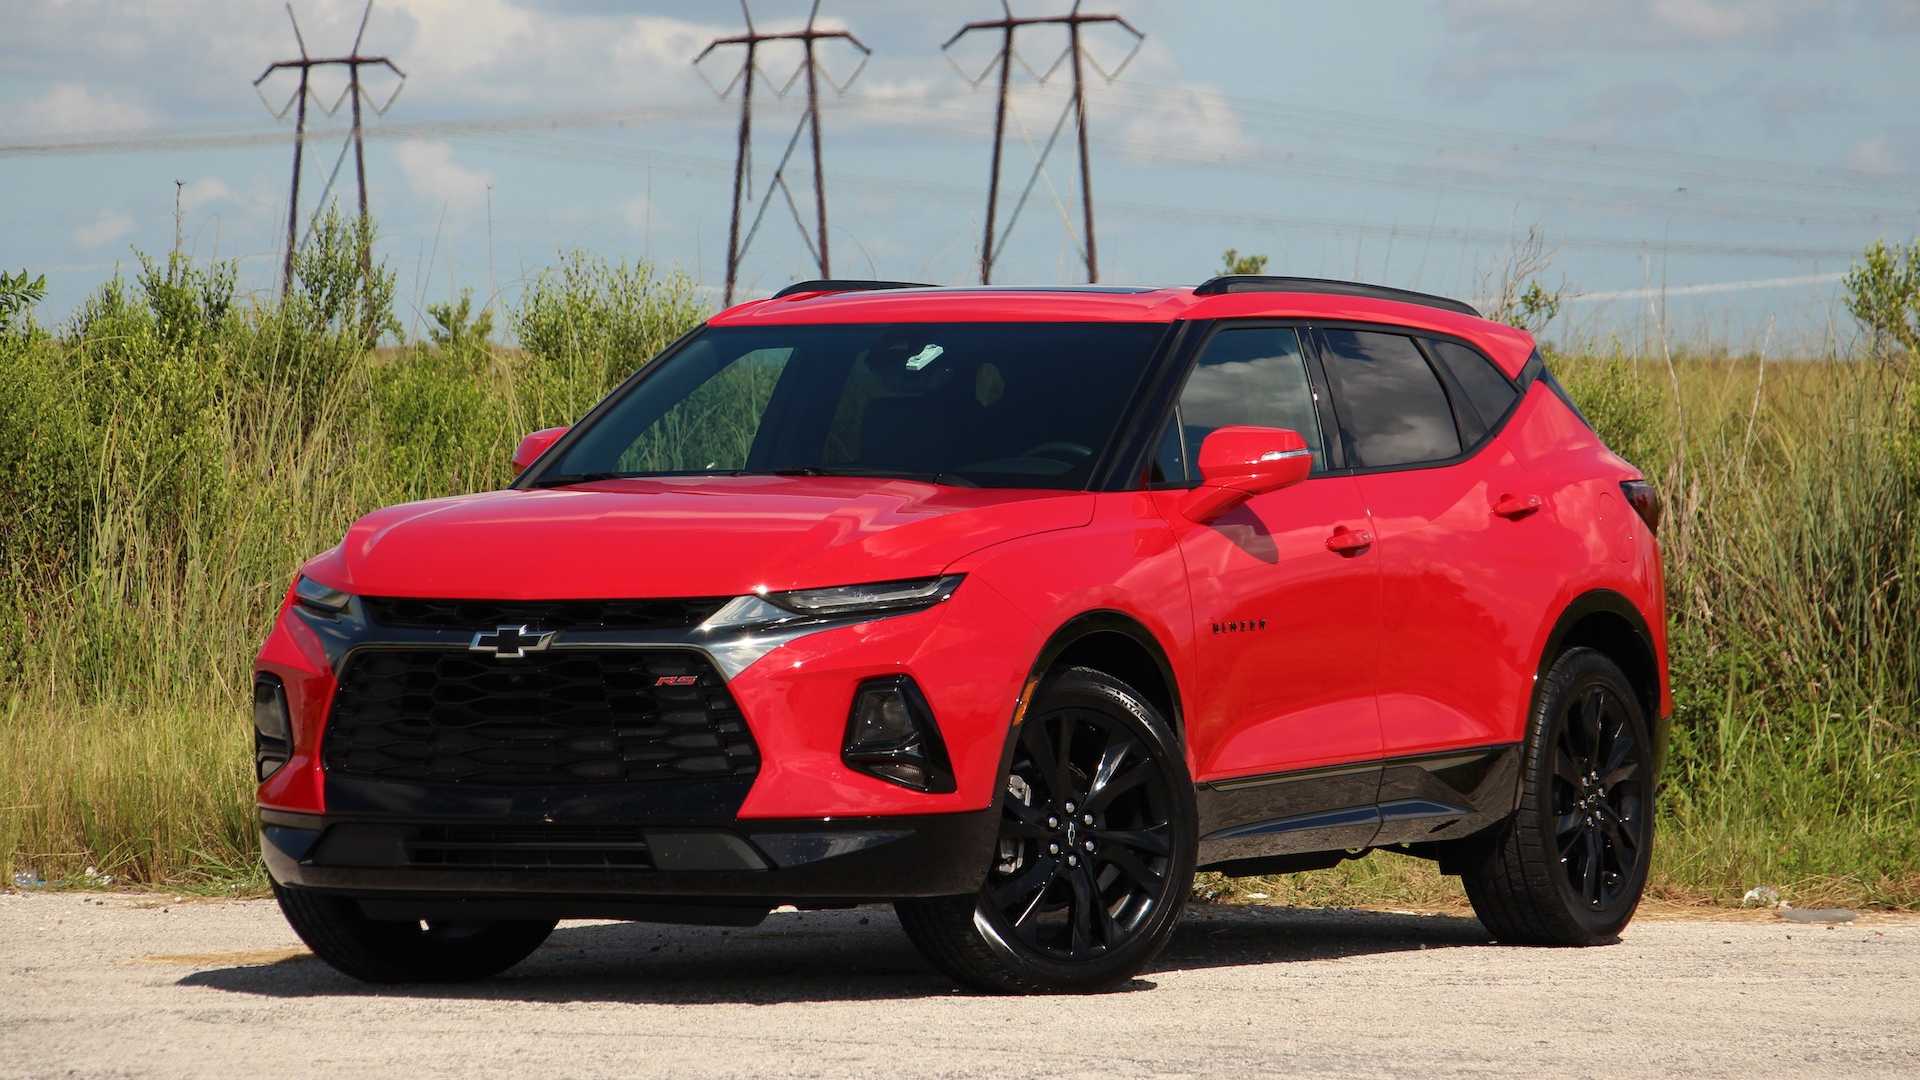 Leasing A Chevy Blazer V6 Is Cheaper Than A Four Cylinder This Month